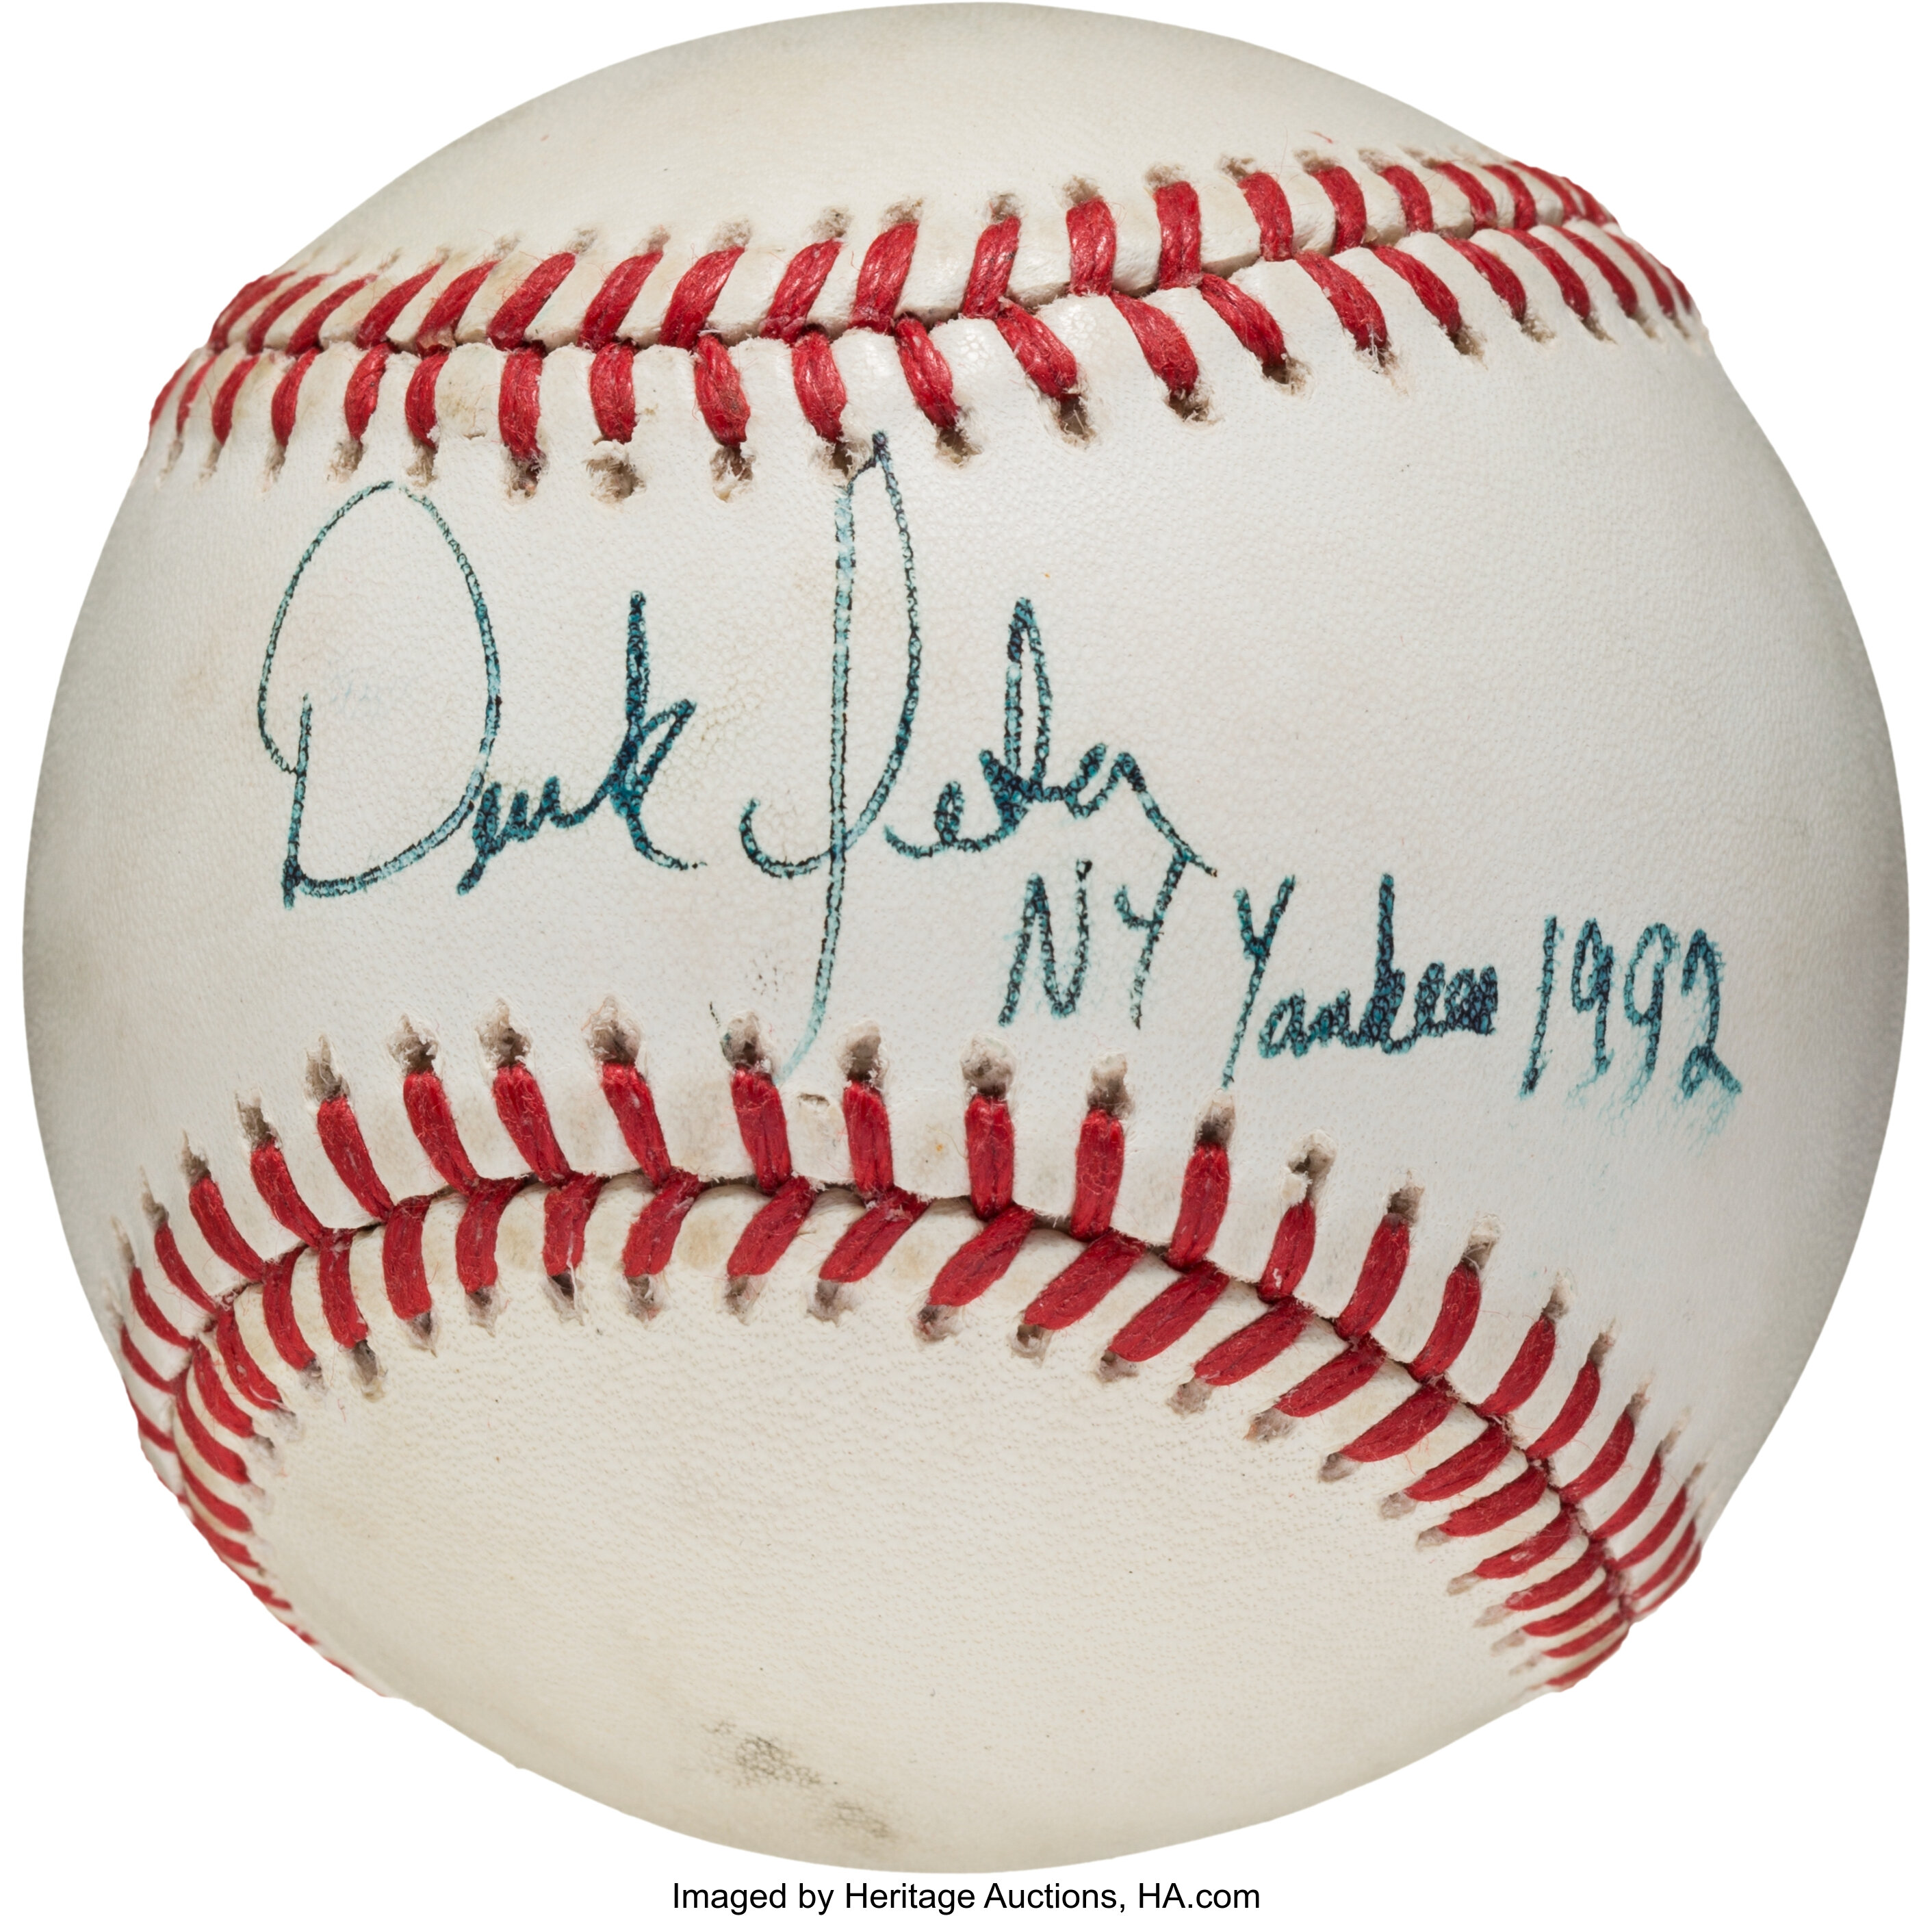 Holy Grail of Early Derek Jeter Autographed Baseballs Coming to Auction